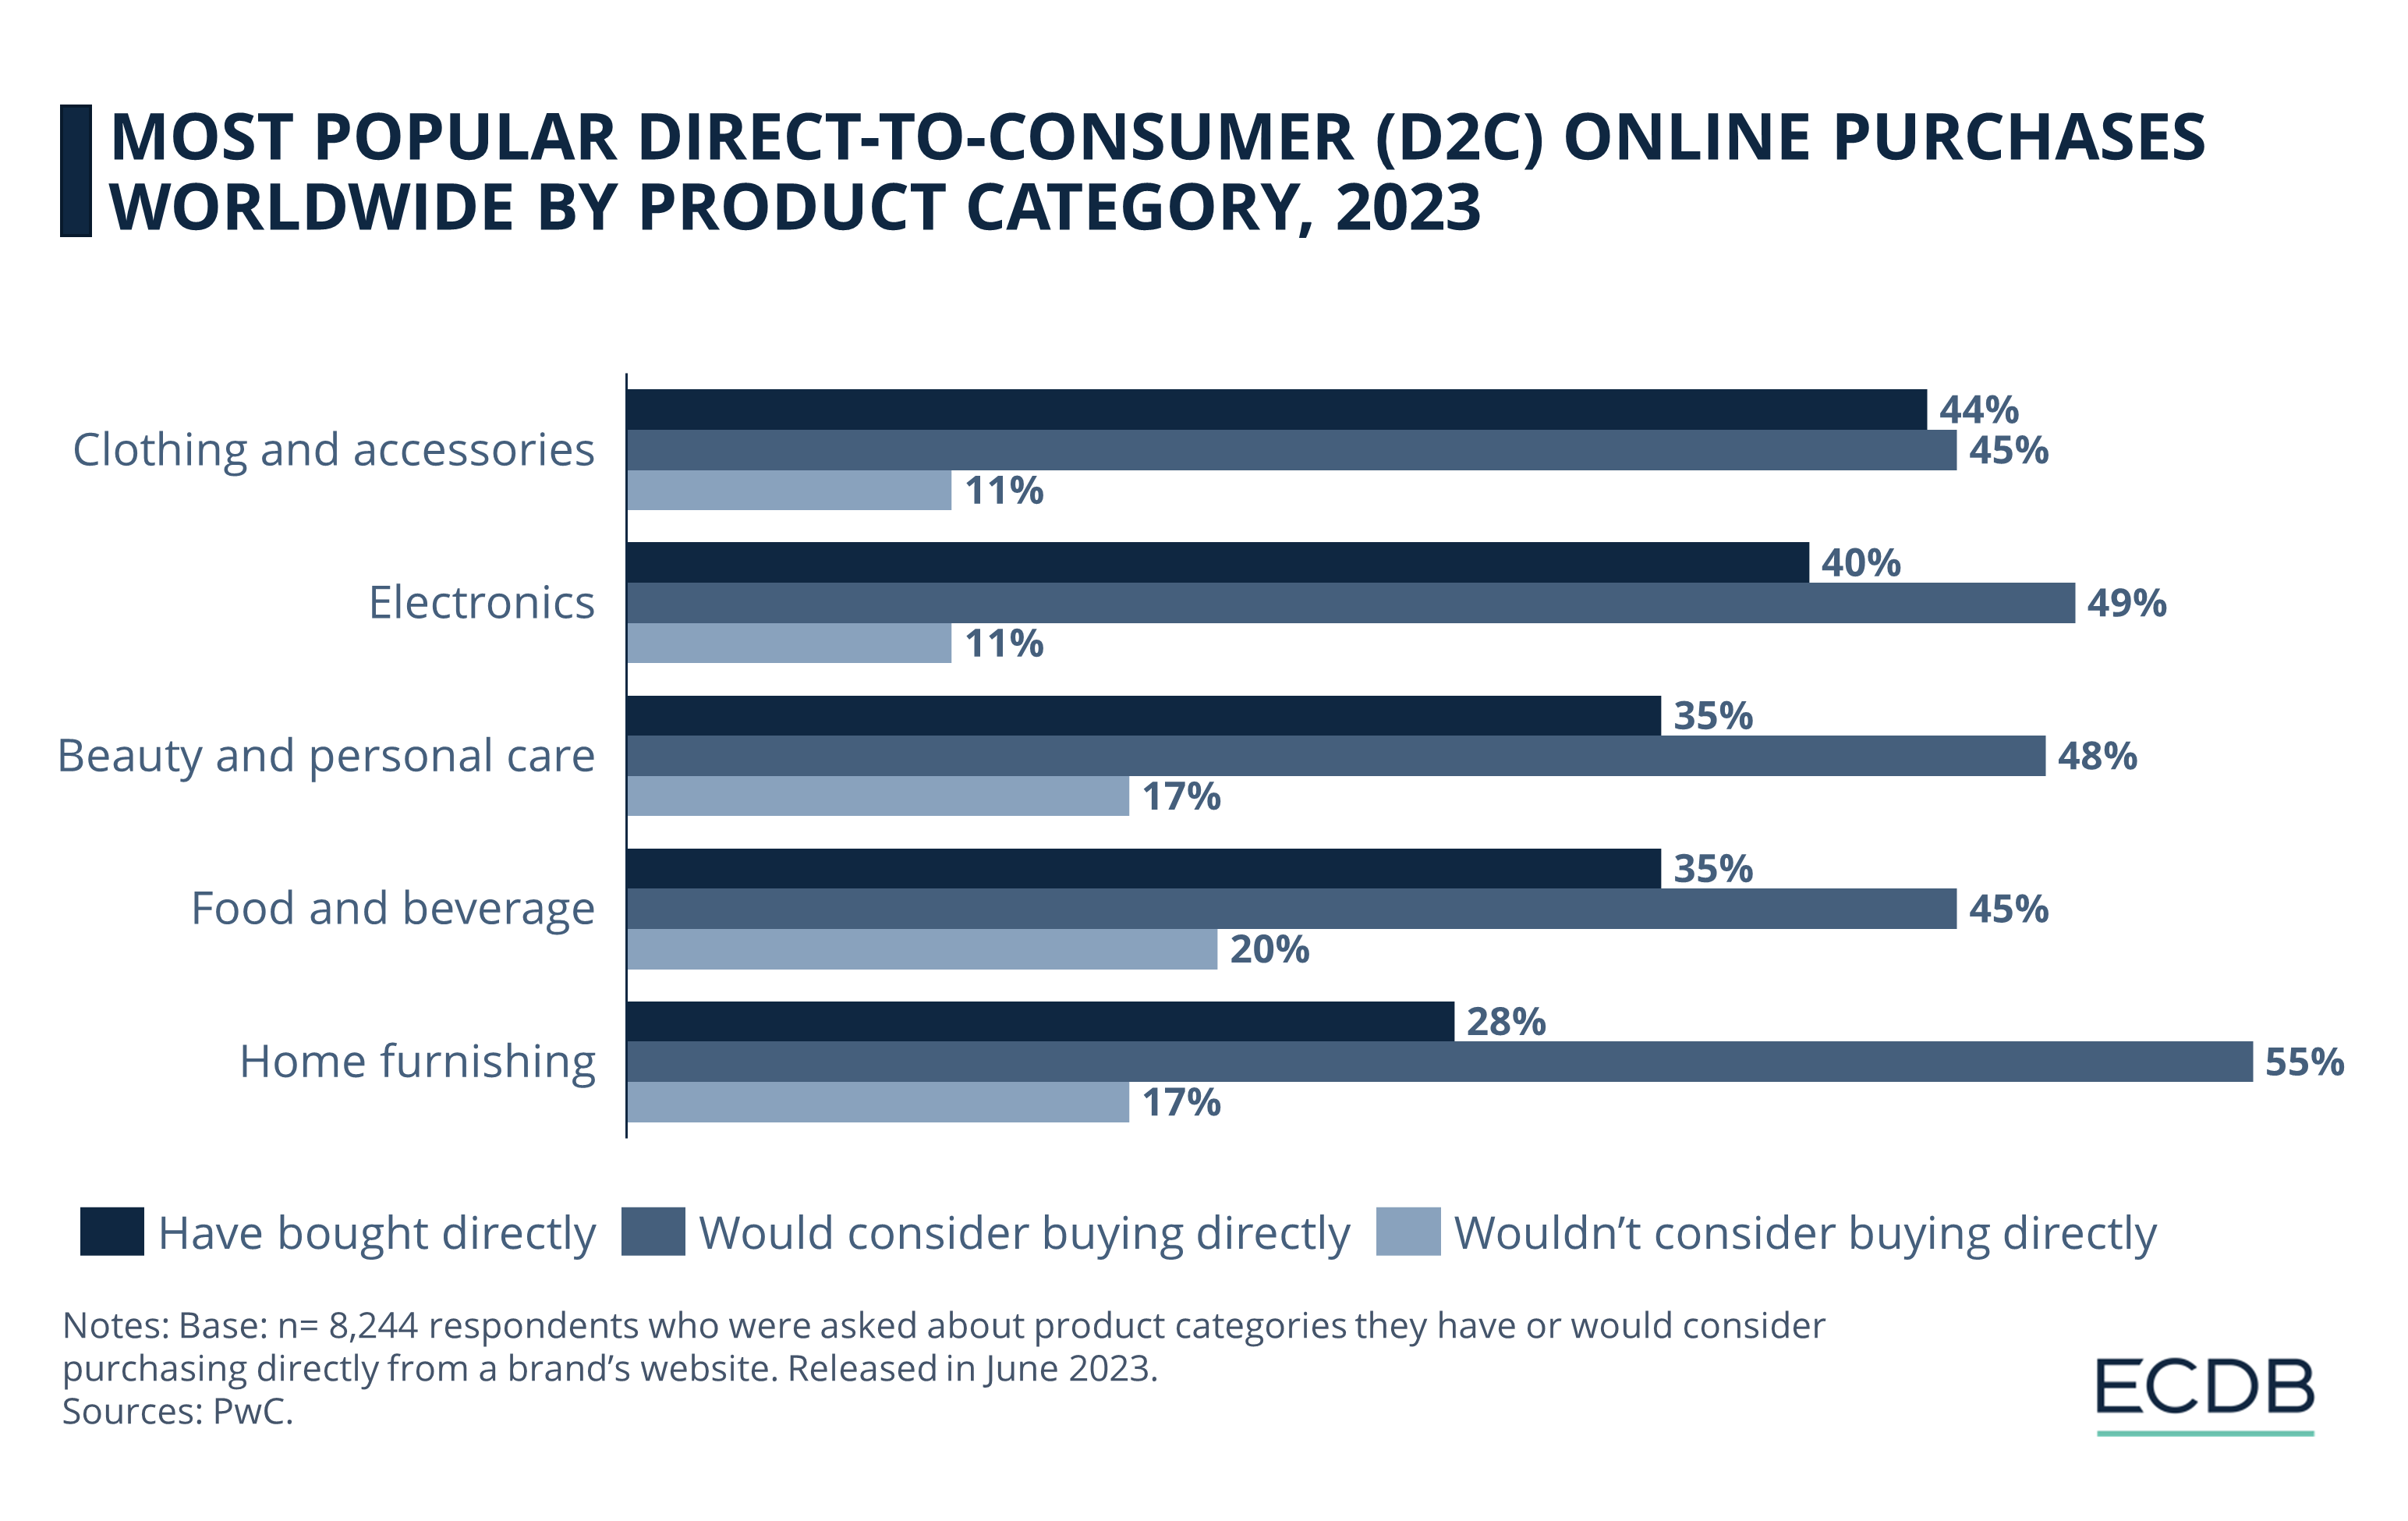 Most Popular Direct-to-Consumer (D2C) Online Purchases Worldwide by Product Category, 2023